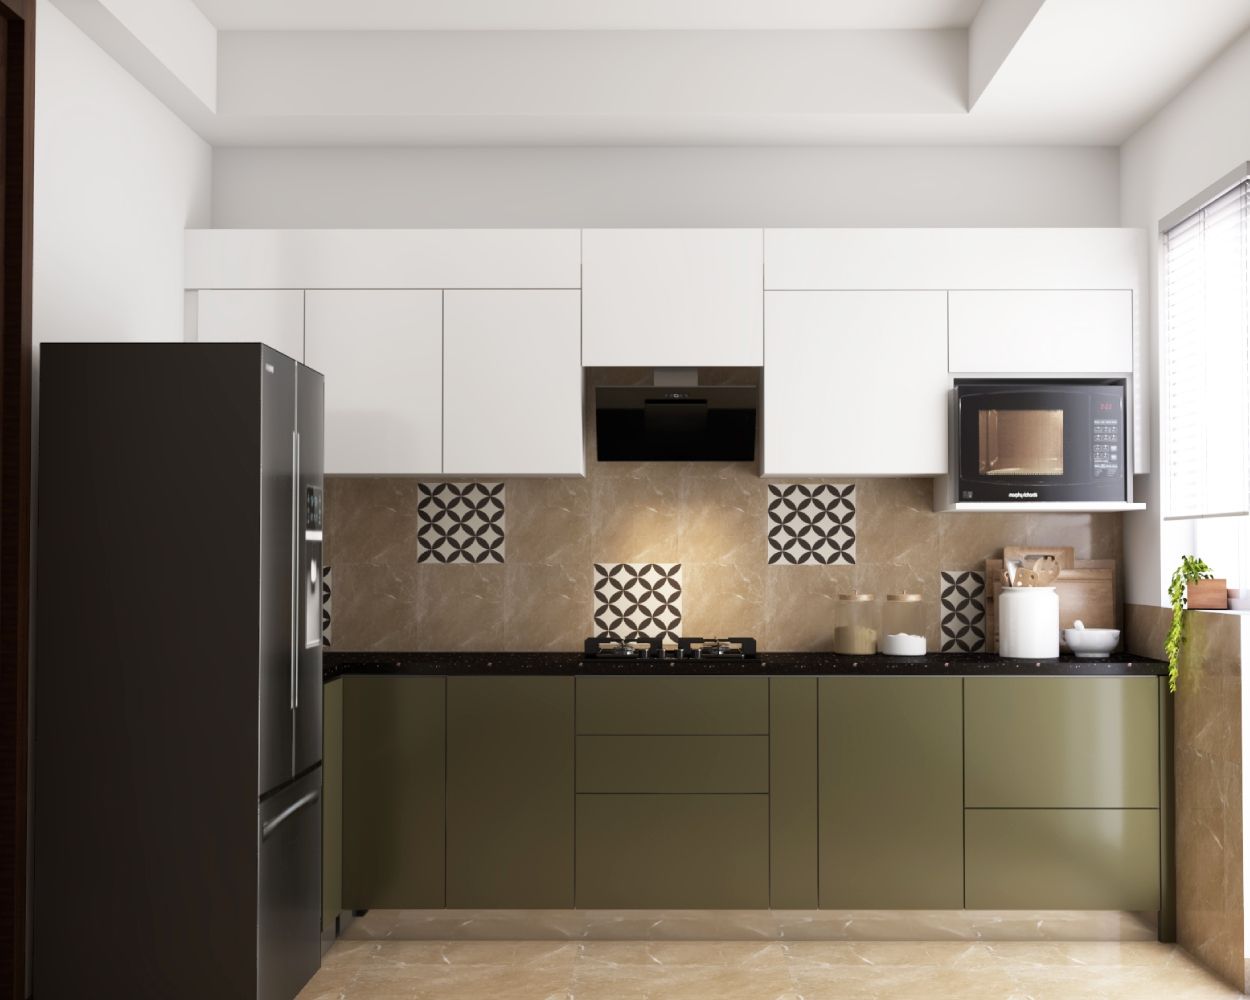 Modern Modular Parallel Kitchen Design With Green And Frosty White Cabinets